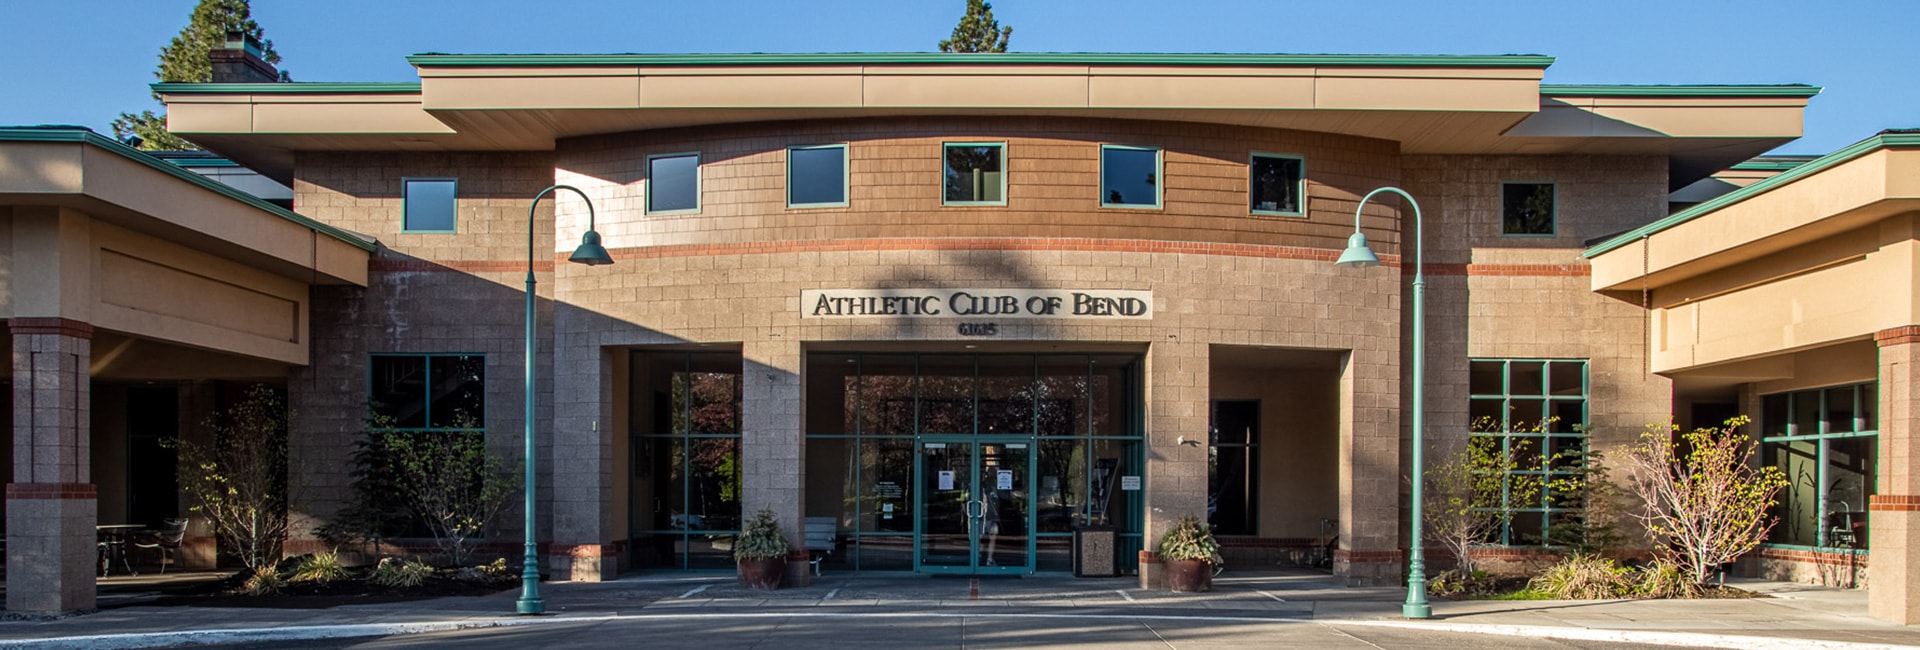 Therapeutic Associates Physical Therapy - Athletic Club of Bend